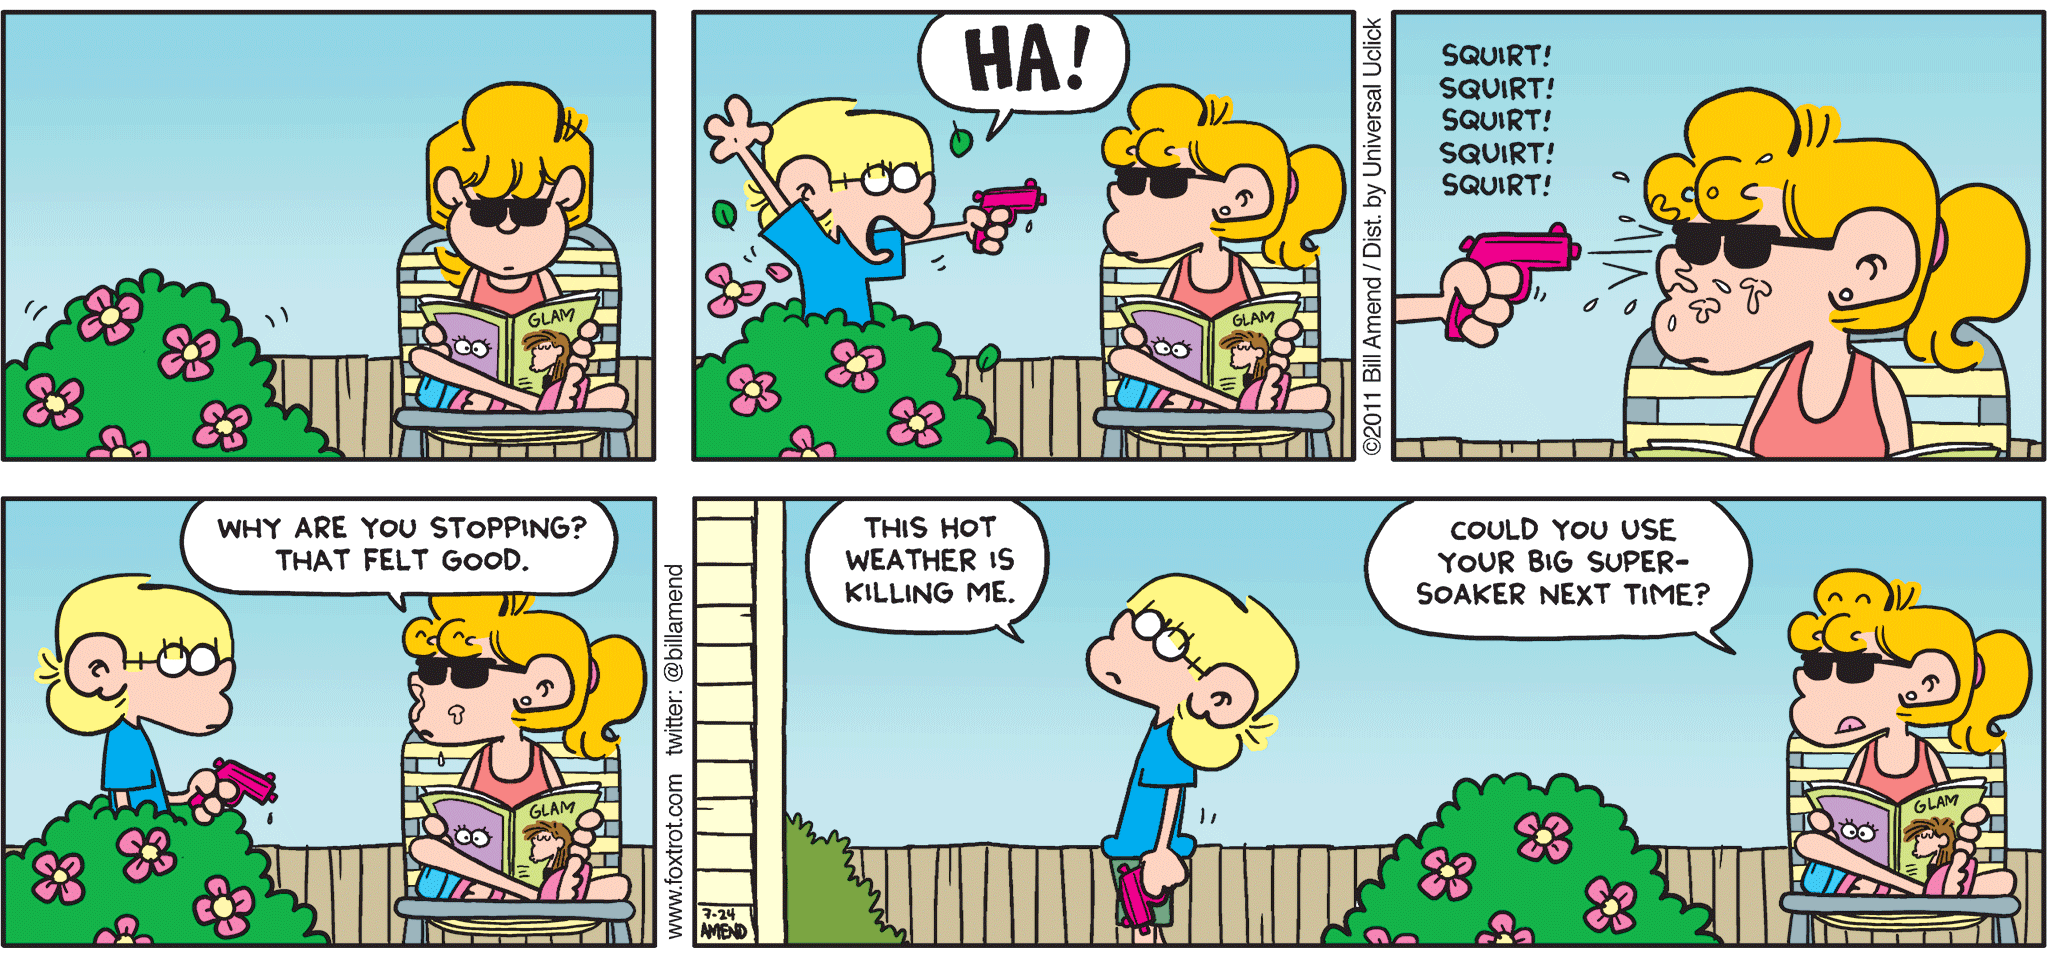 FoxTrot comic strip by Bill Amend - "A Good Squirt Ruined" published July 24, 2011 - Jason: HA! Paige: Why are you stopping? That felt good. Jason: This hot weather is killing me. Paige: Could you use your big super-soaker next time?